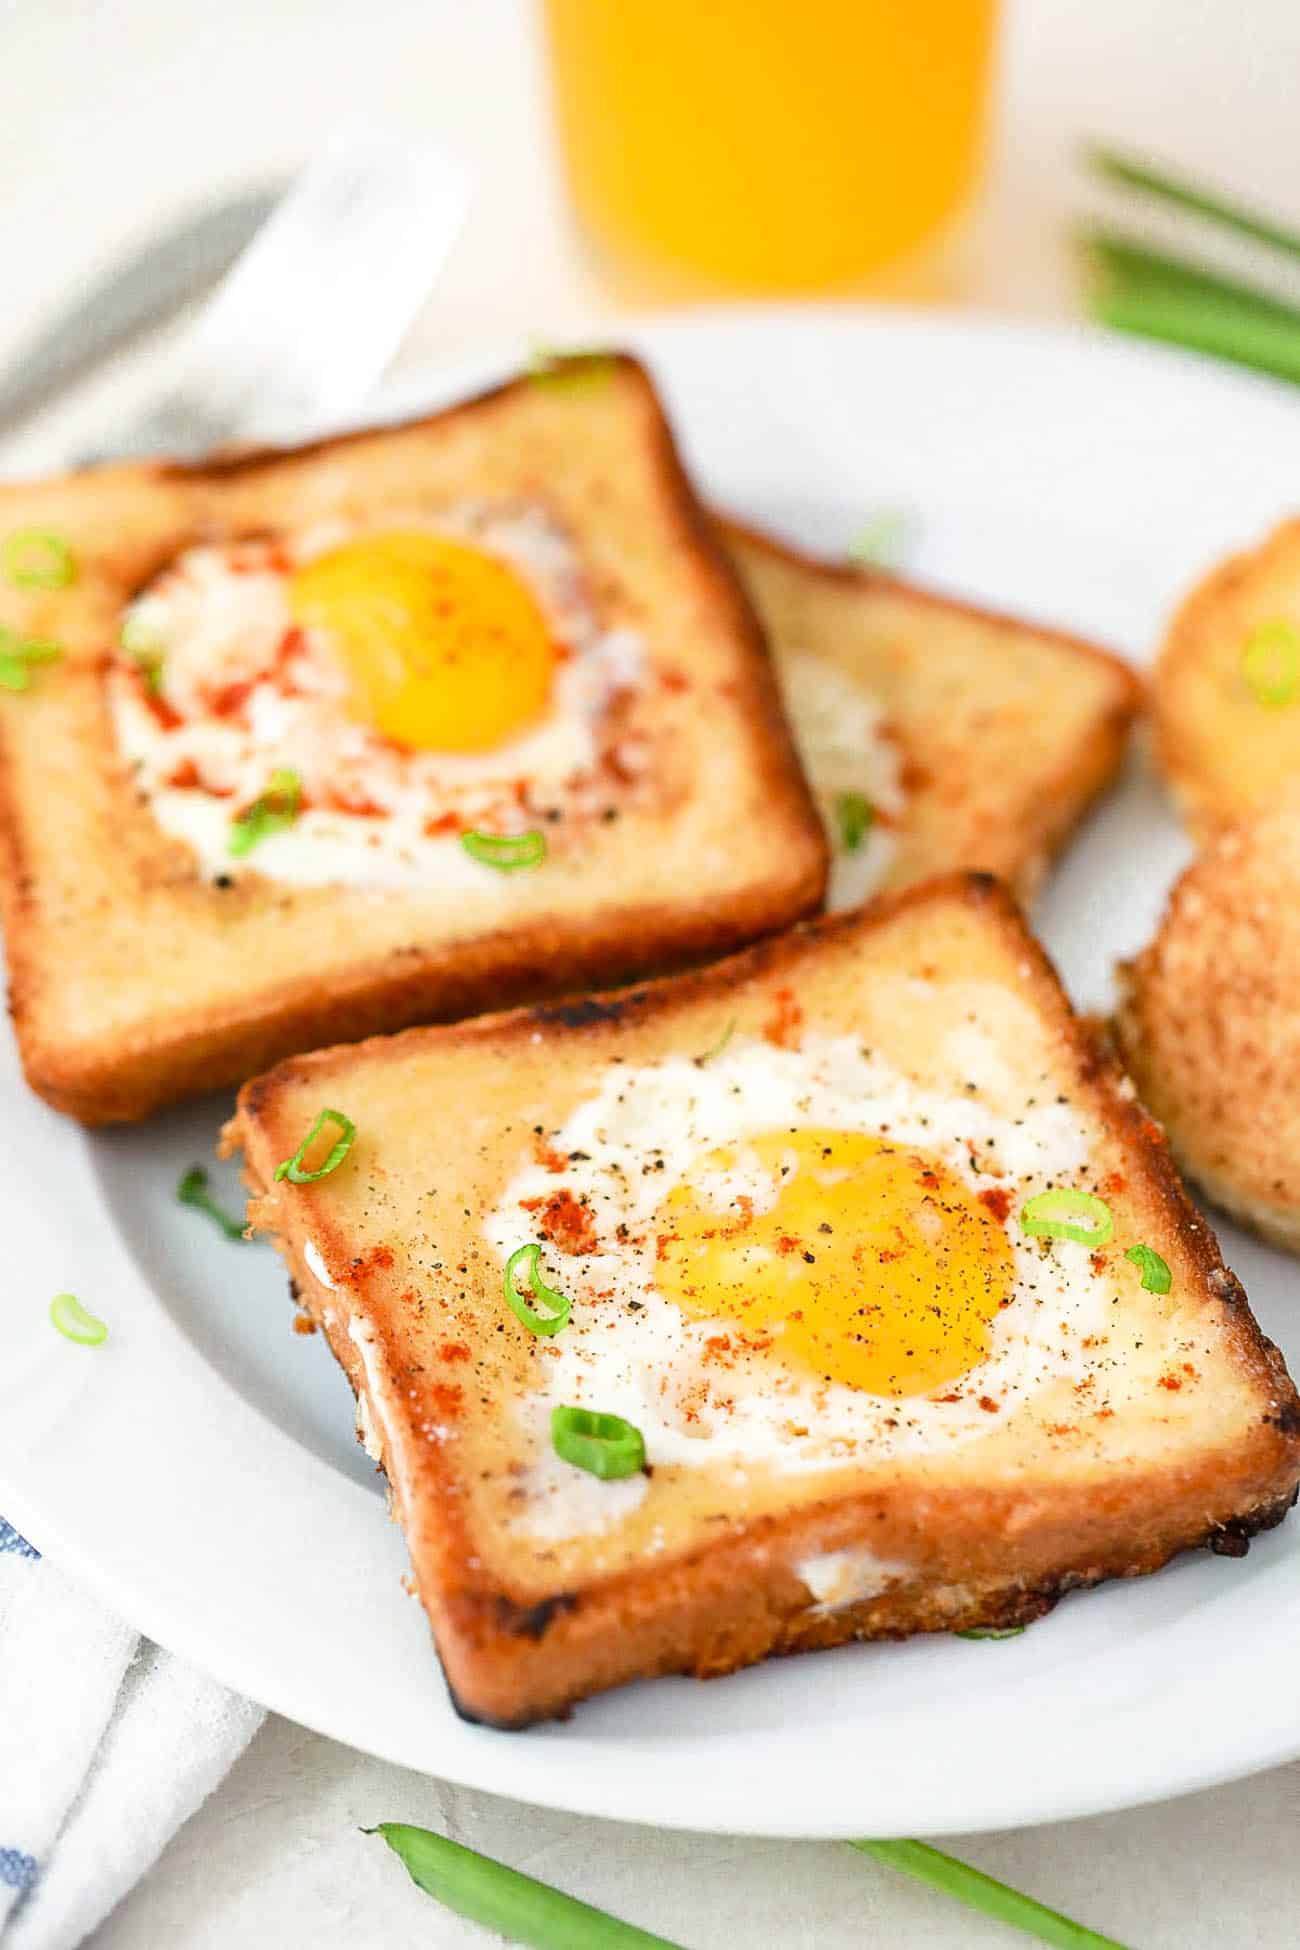 eggs in a basket - a classic vegetarian breakfast served on a white plate